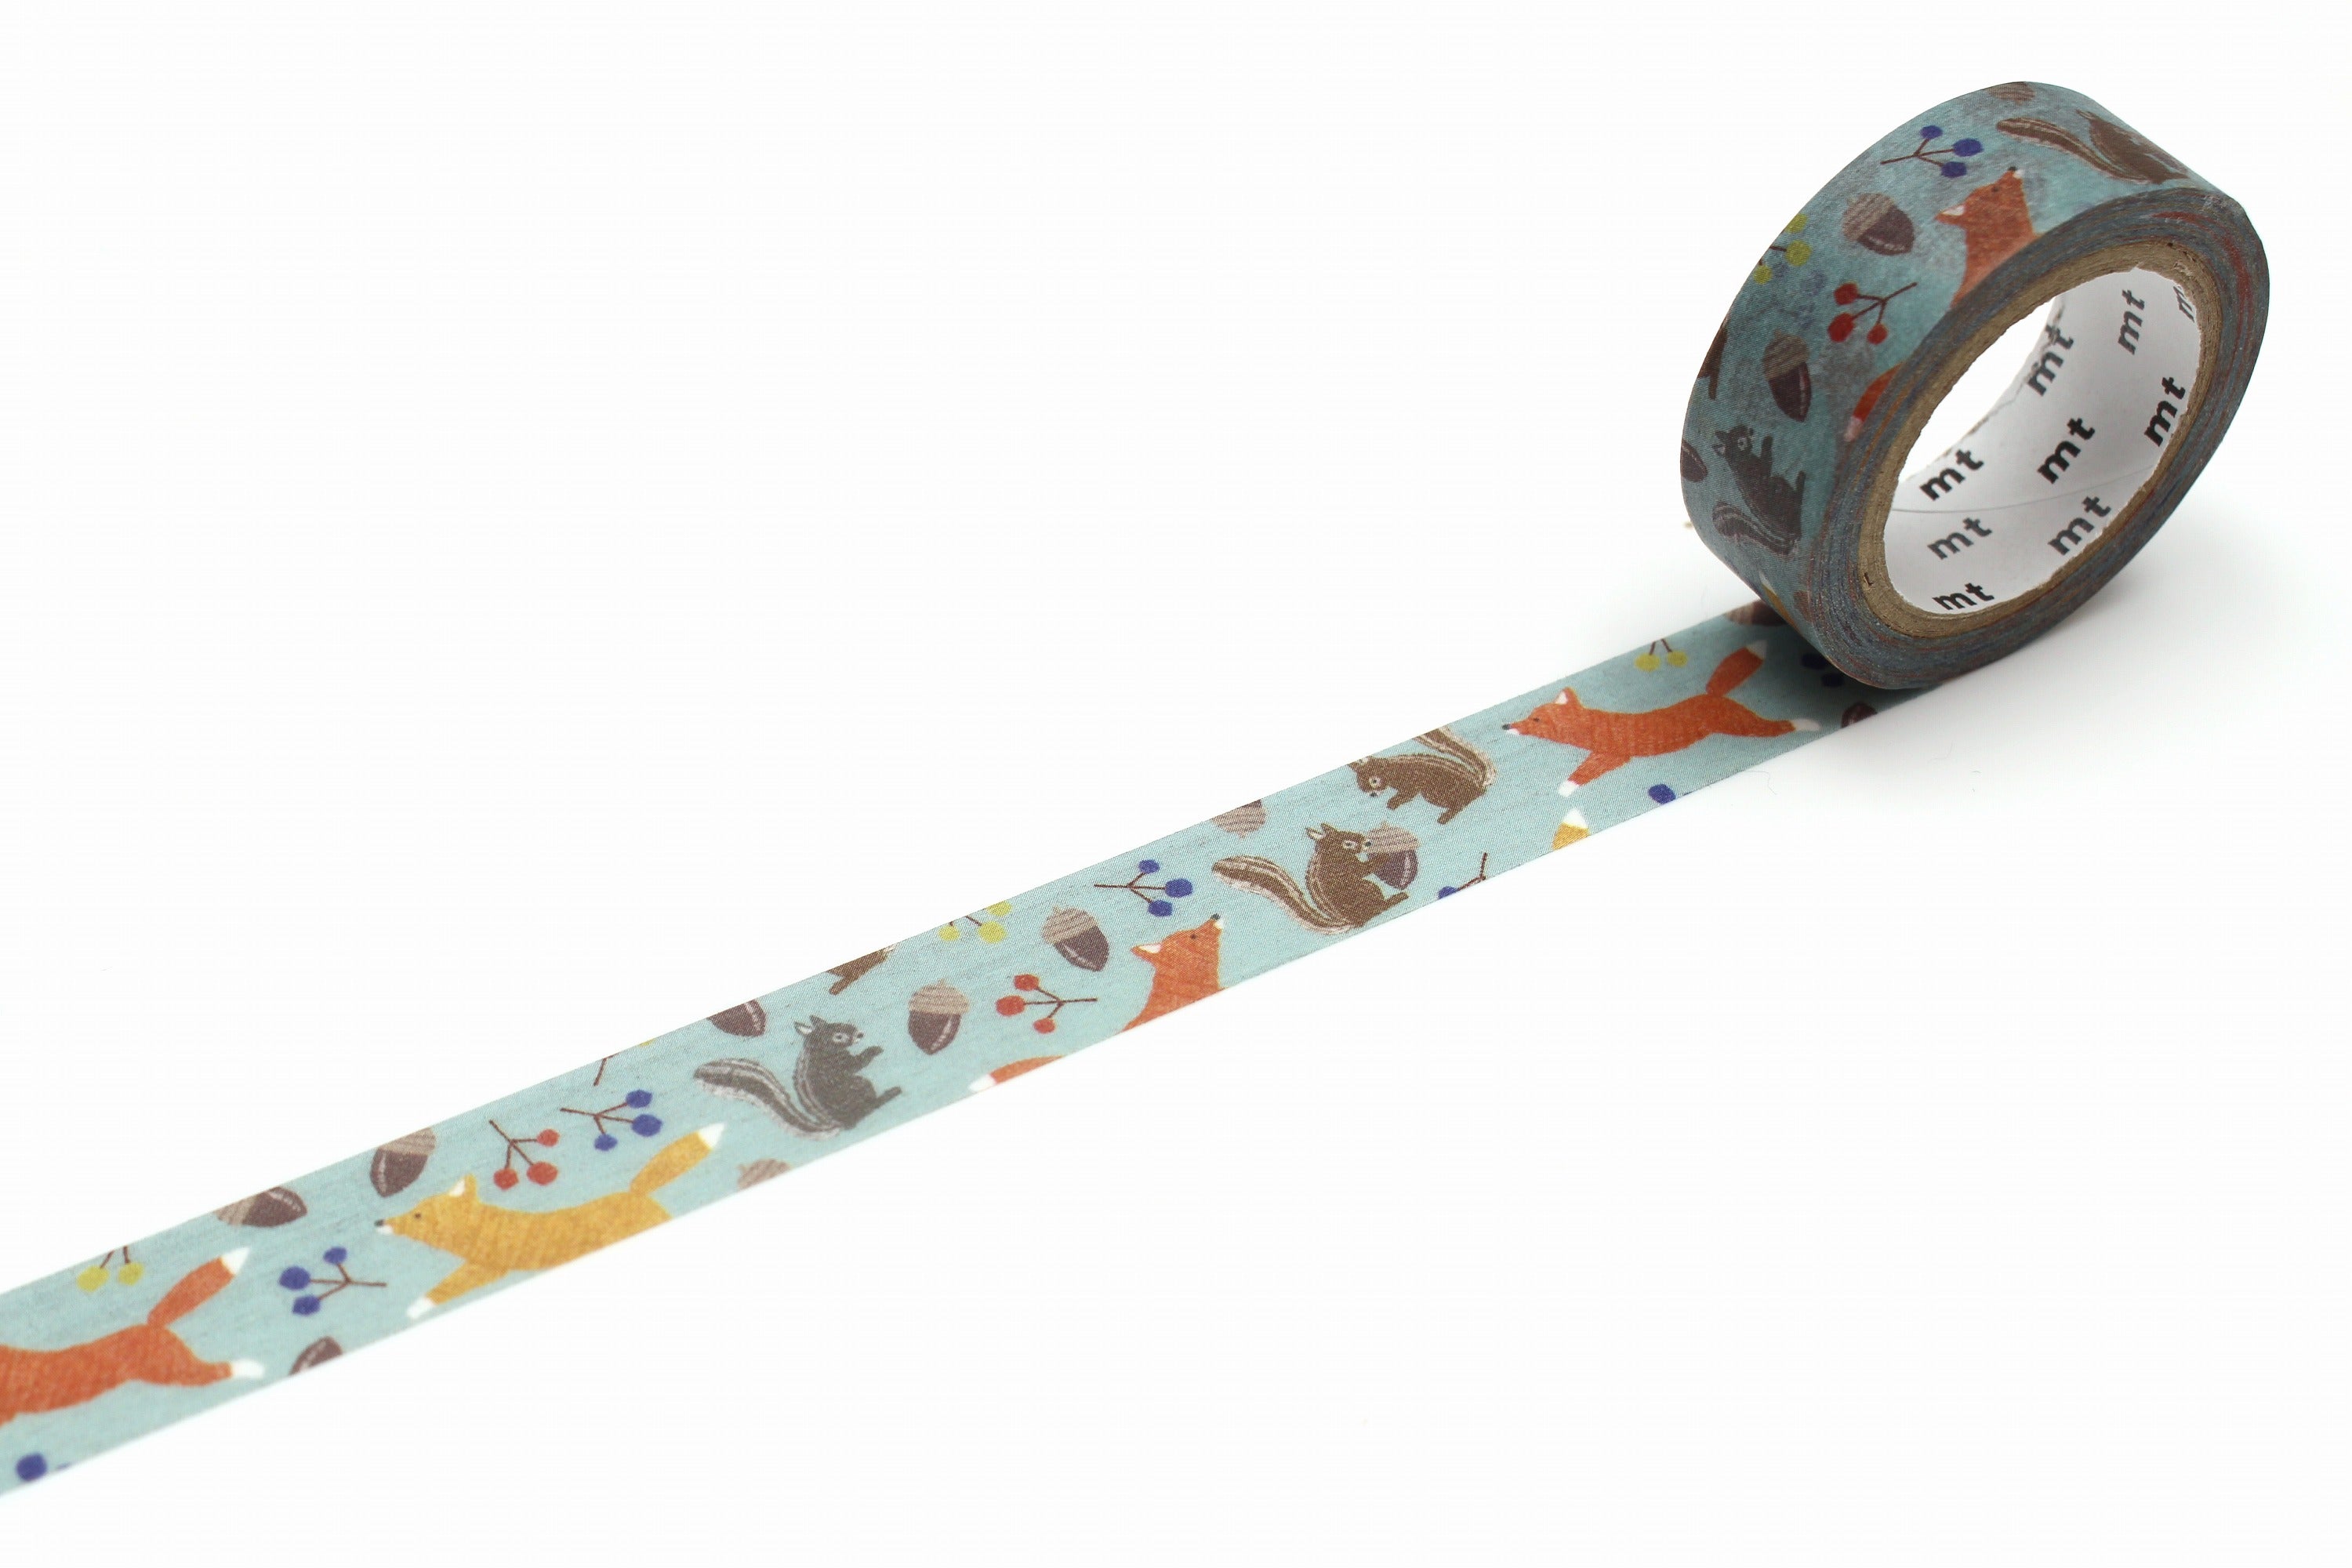 mt ex - Embroidery Fox and Squirrel - 15mm Washi Tape